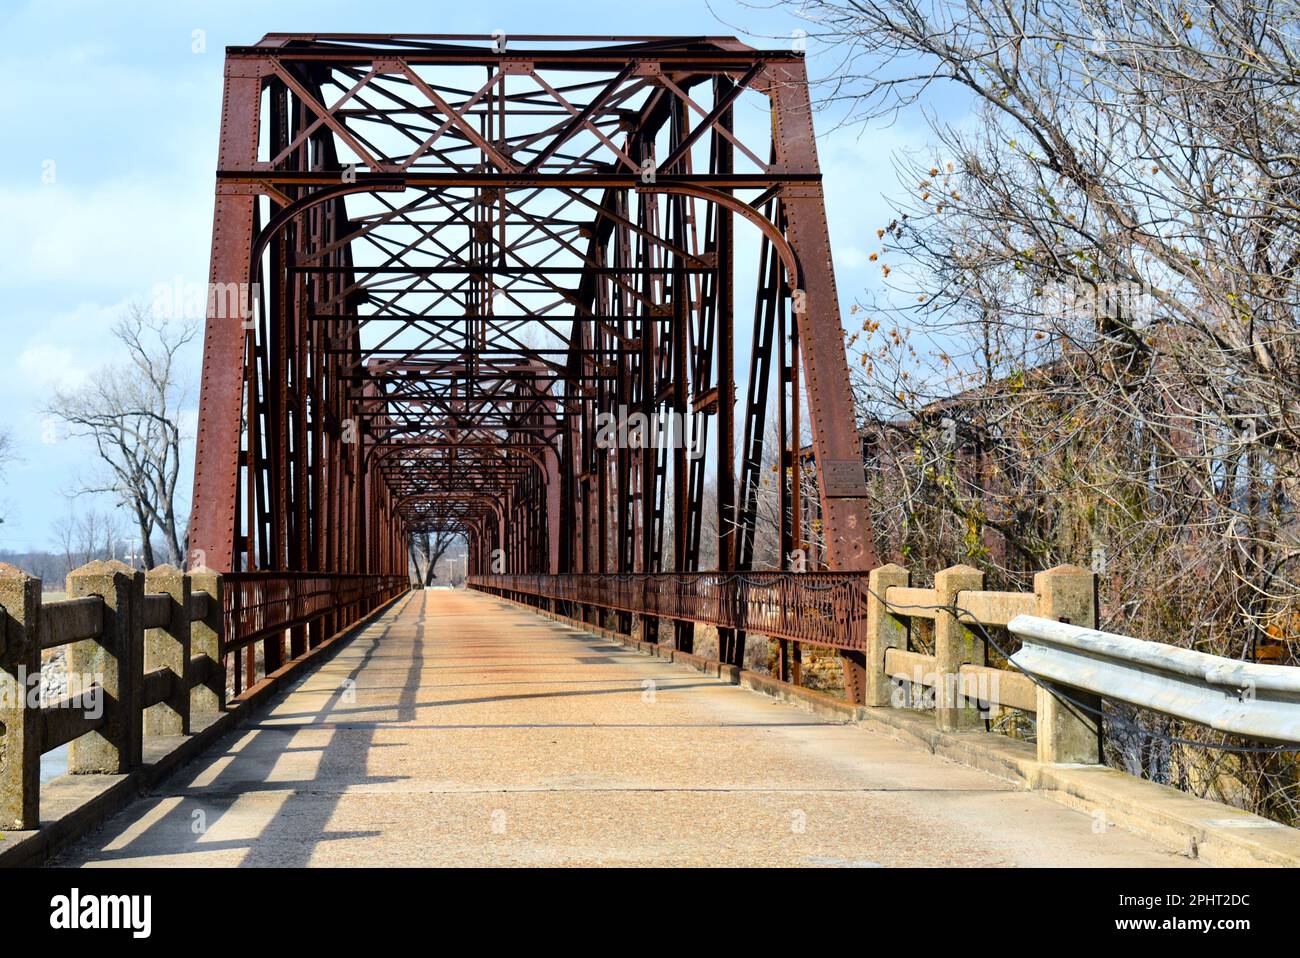 Grand Bridge over the Neosho (Grand) River at Fort Gibson, Oklahoma, OK, United States.  The Pacific Union train bridge is visible in the background. Stock Photo